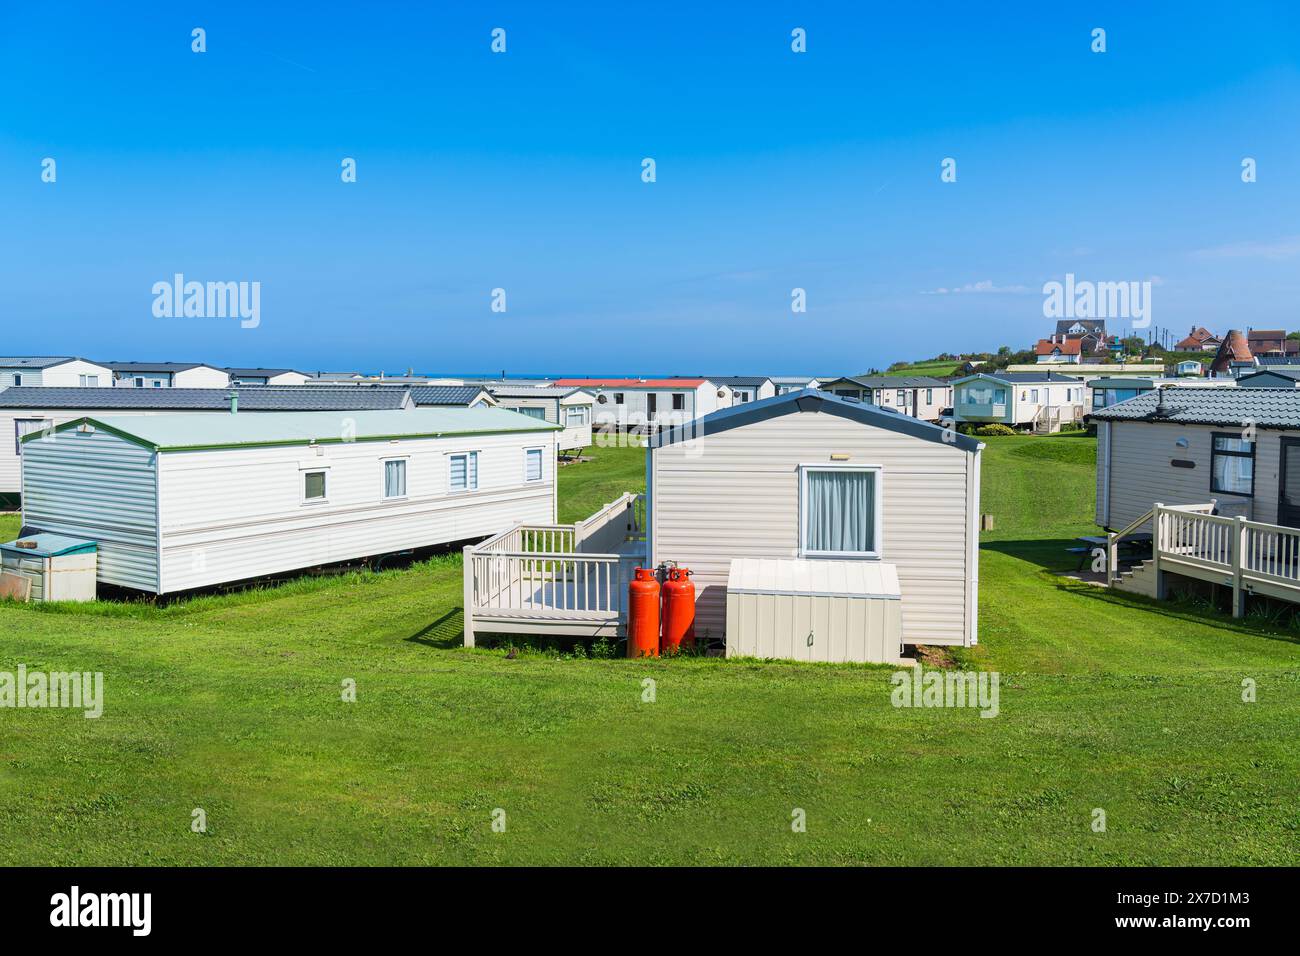 Static Caravan or Mobile Home site in England Stock Photo